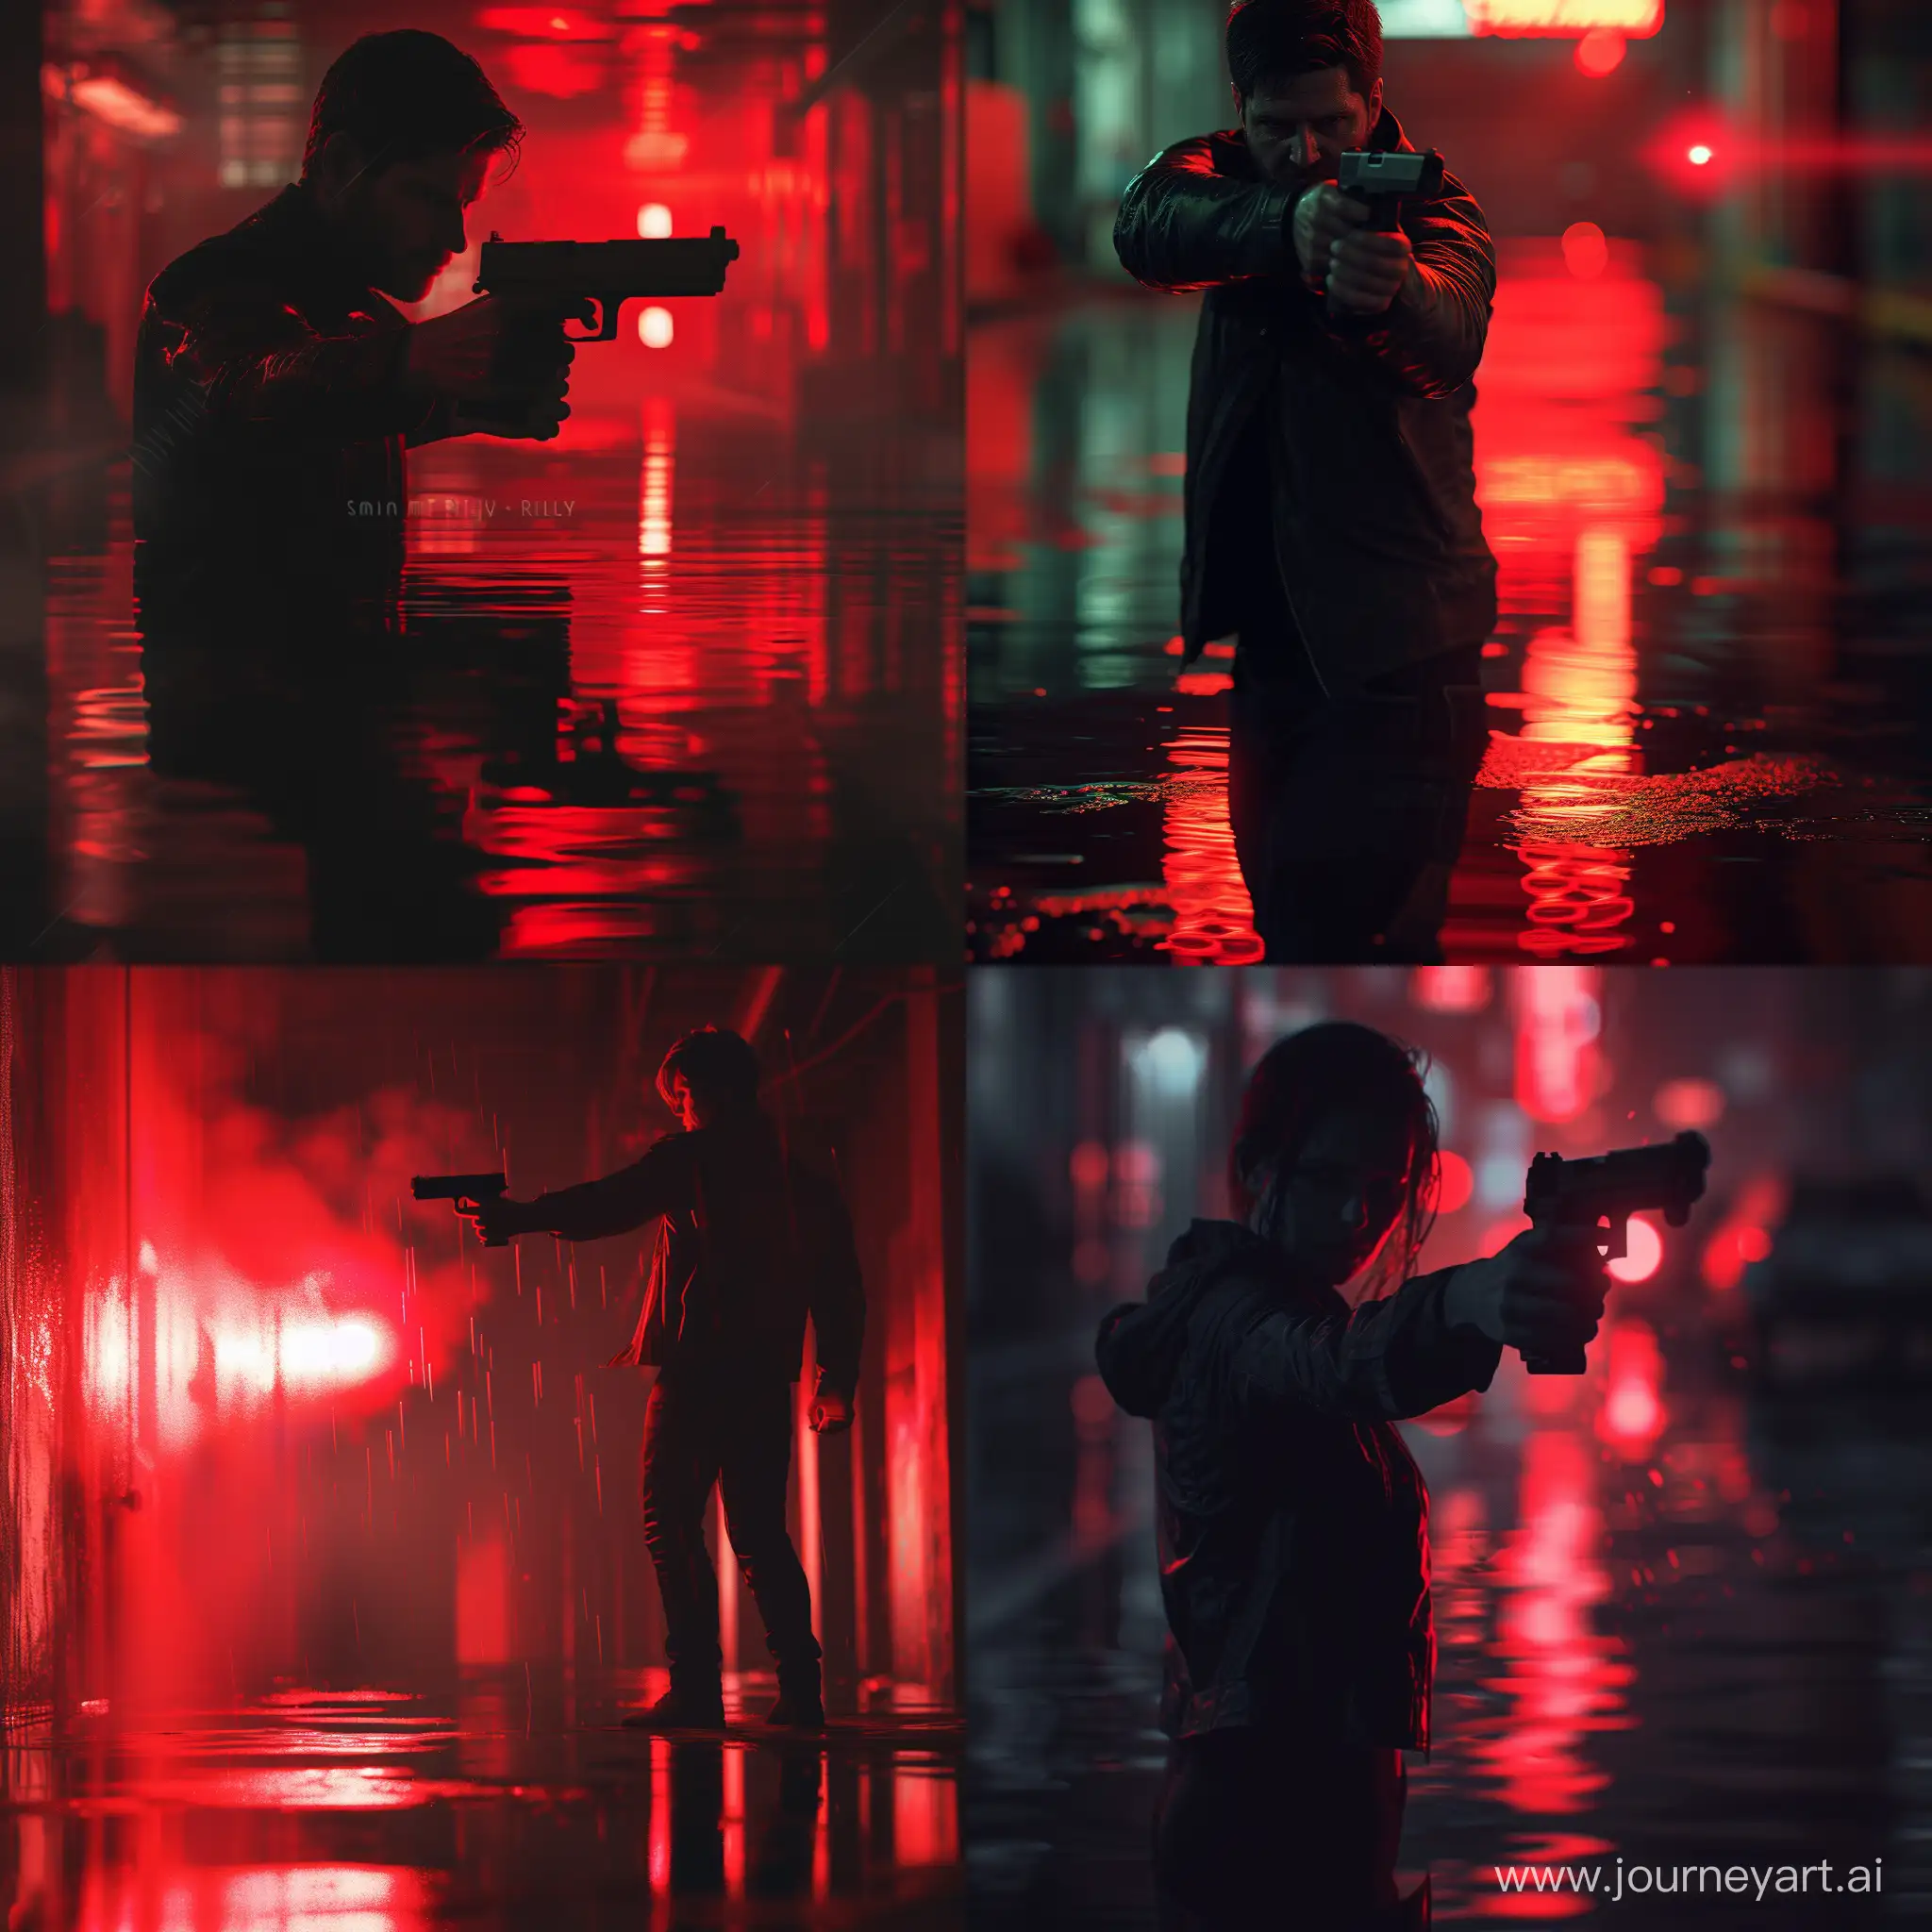 Simon Riely "Ghost" With a gun in hand in the middle of Dark Place, Red Light Reflection, Cinematic Pose, Medium Shot, Affinity Designer Software, High Precision--v 6